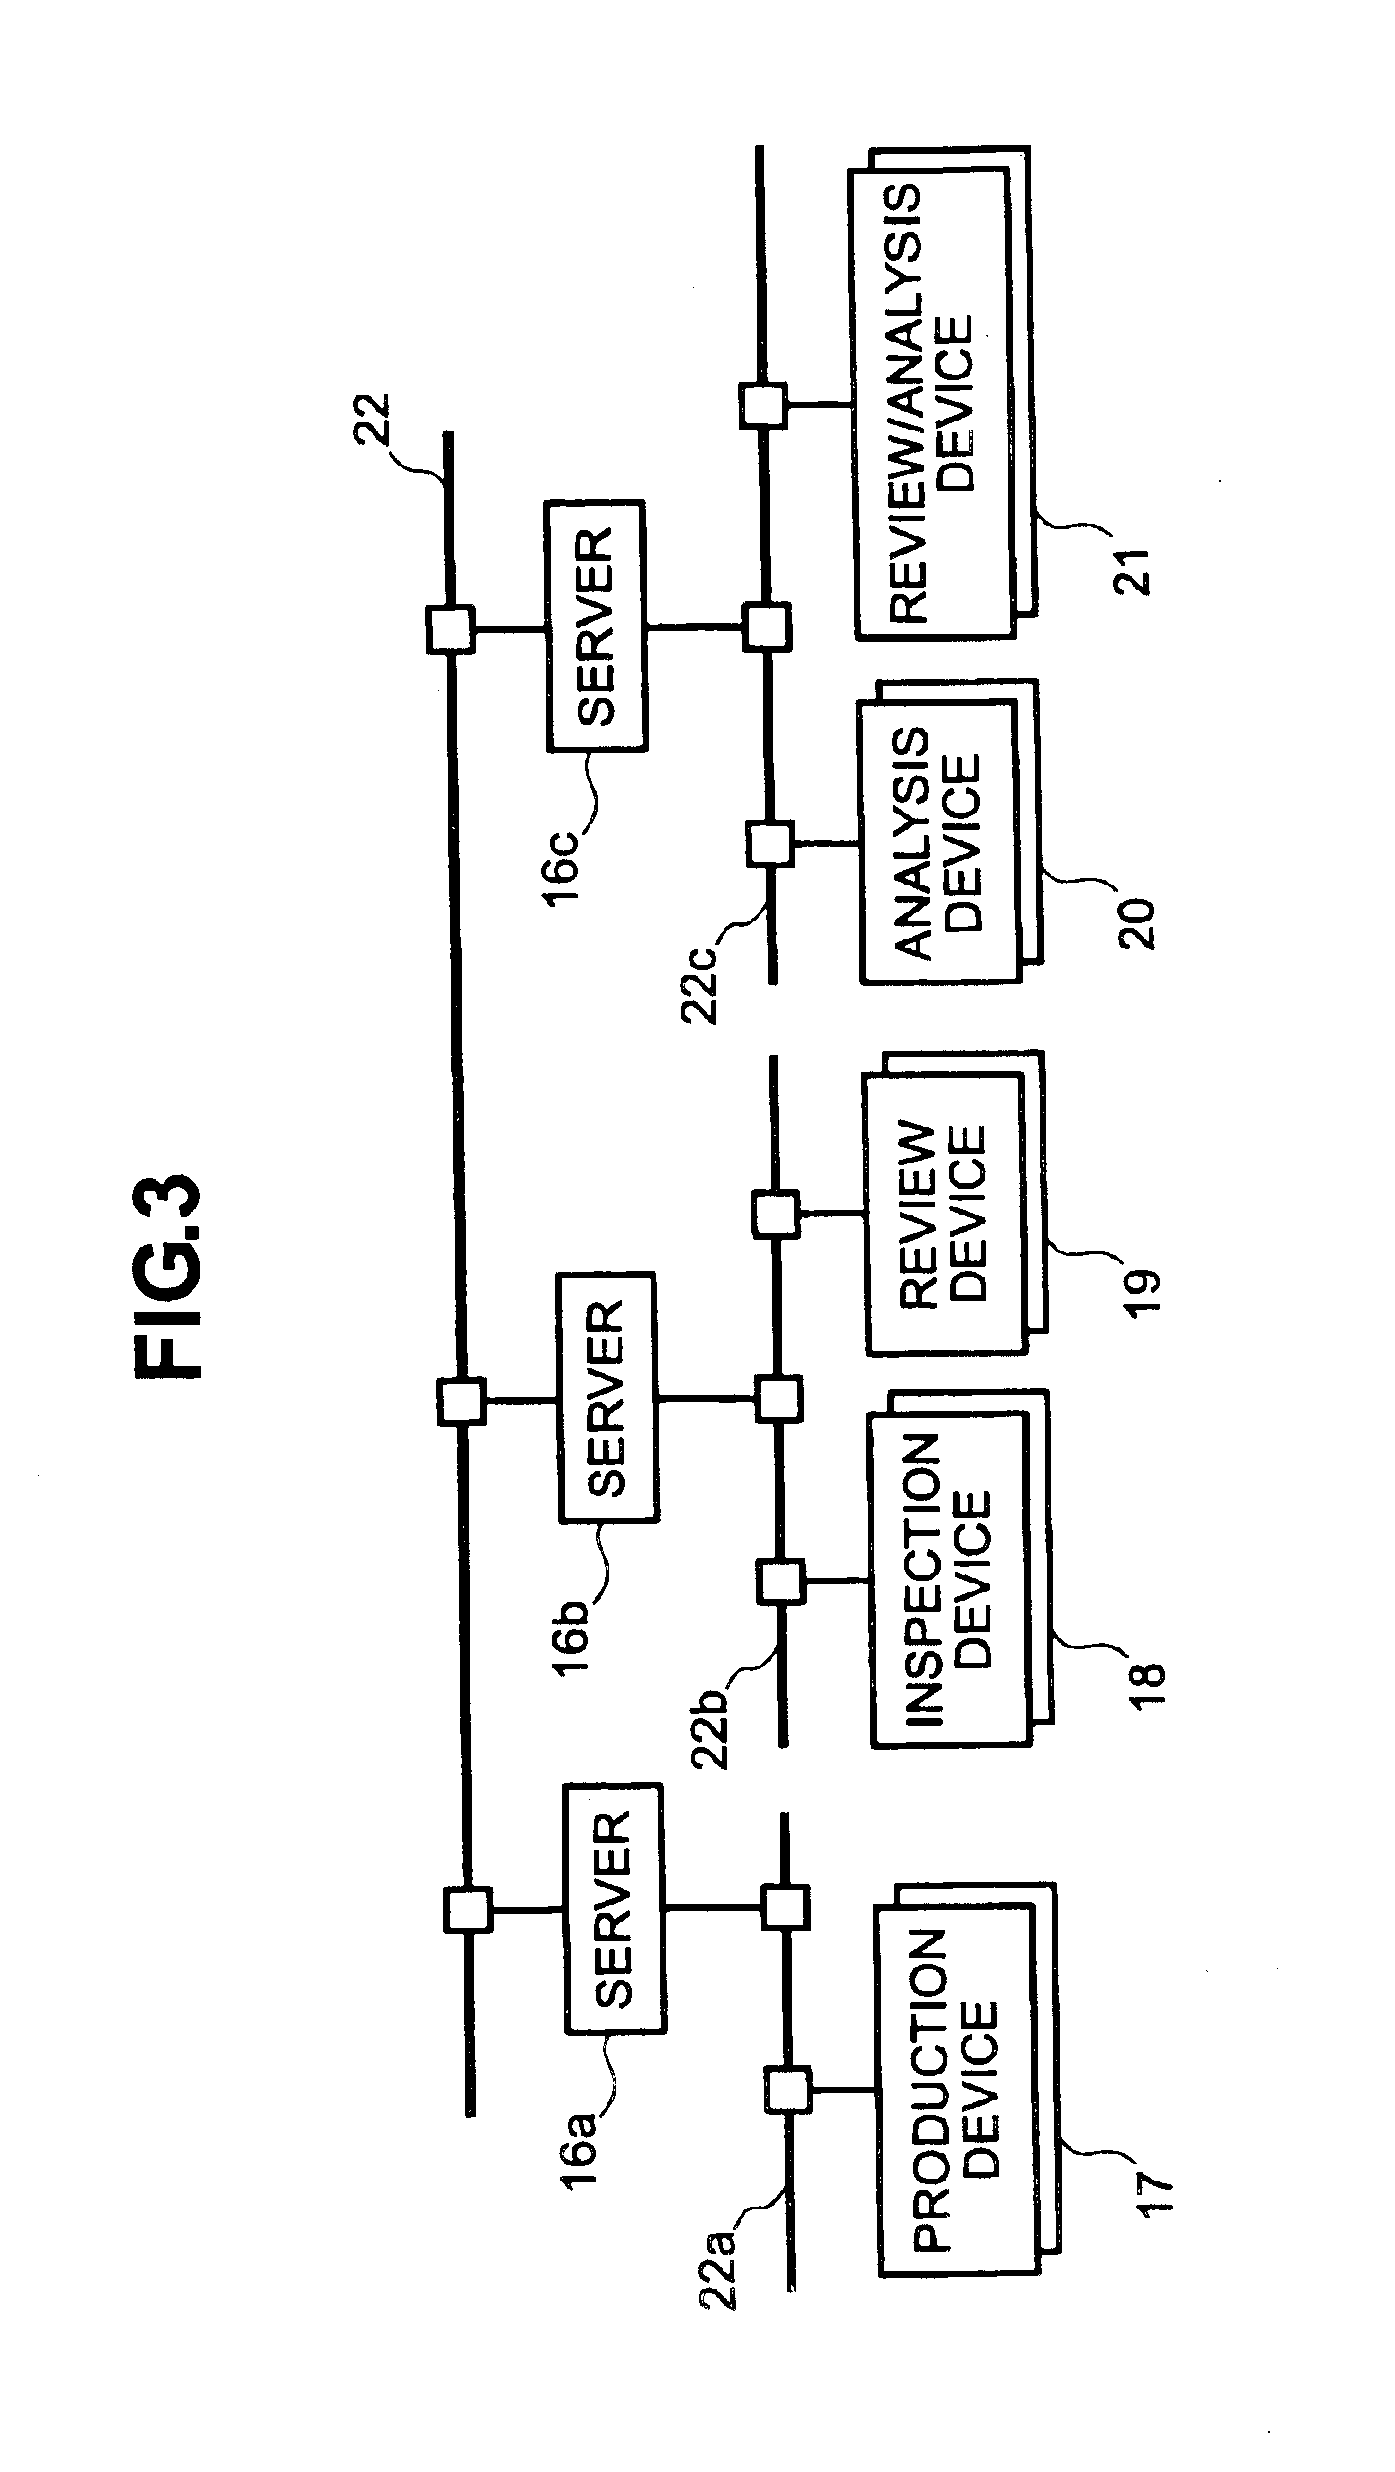 Method and apparatus for analyzing composition of defects